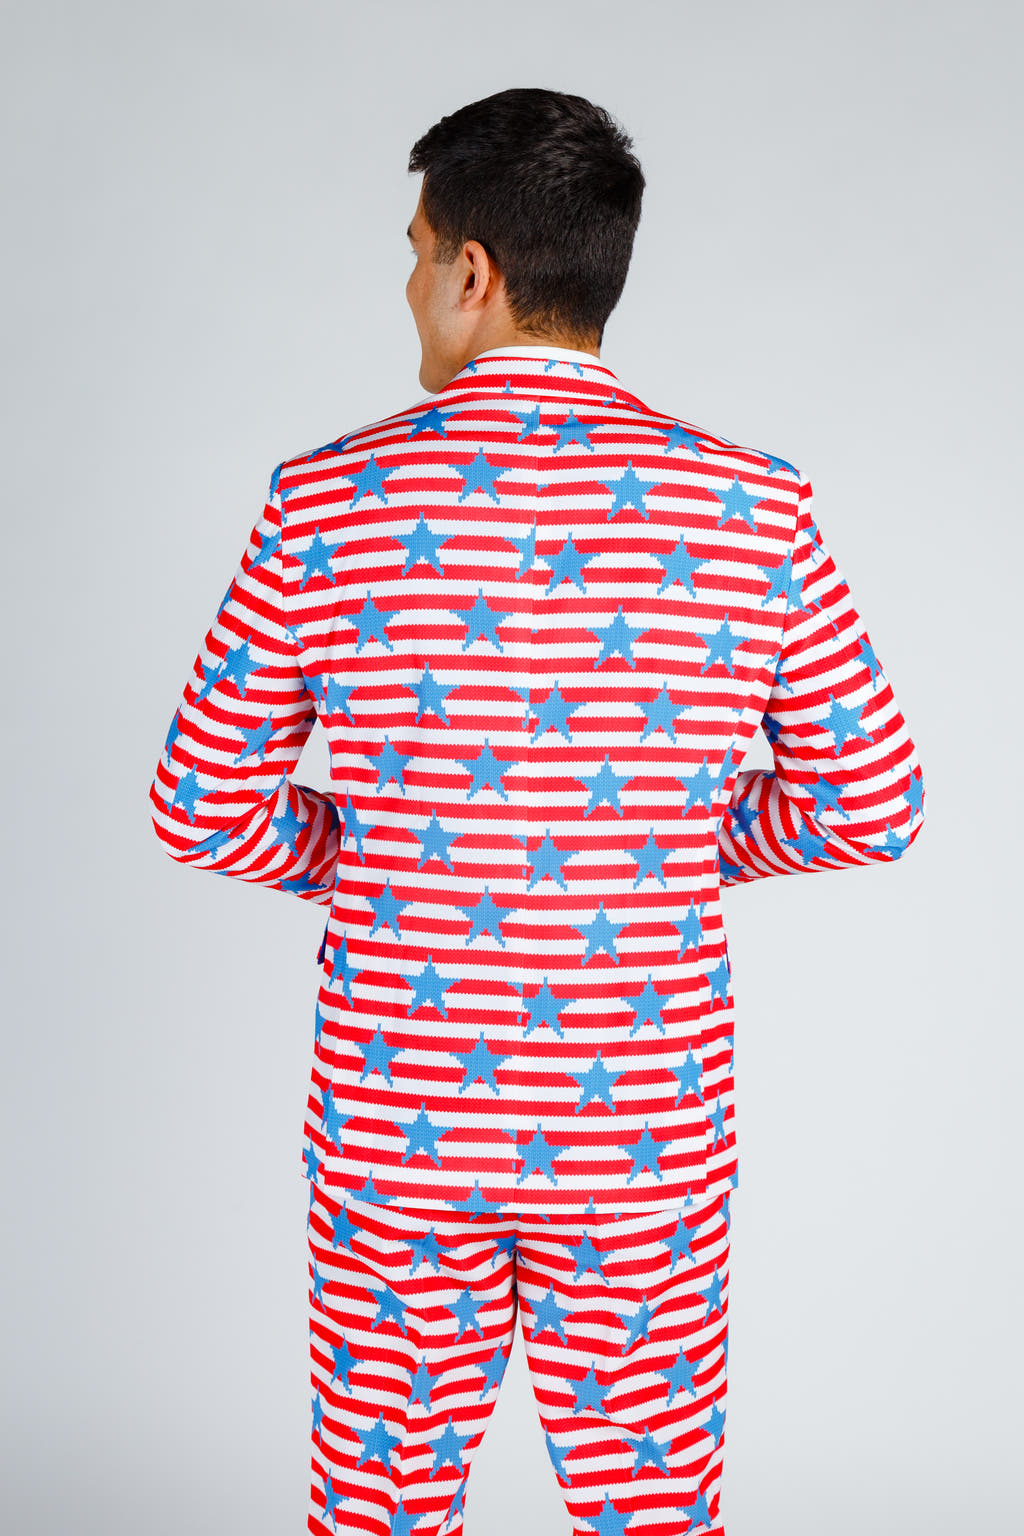 USA Big Knit Printed Party Suit | The Nautical Lad